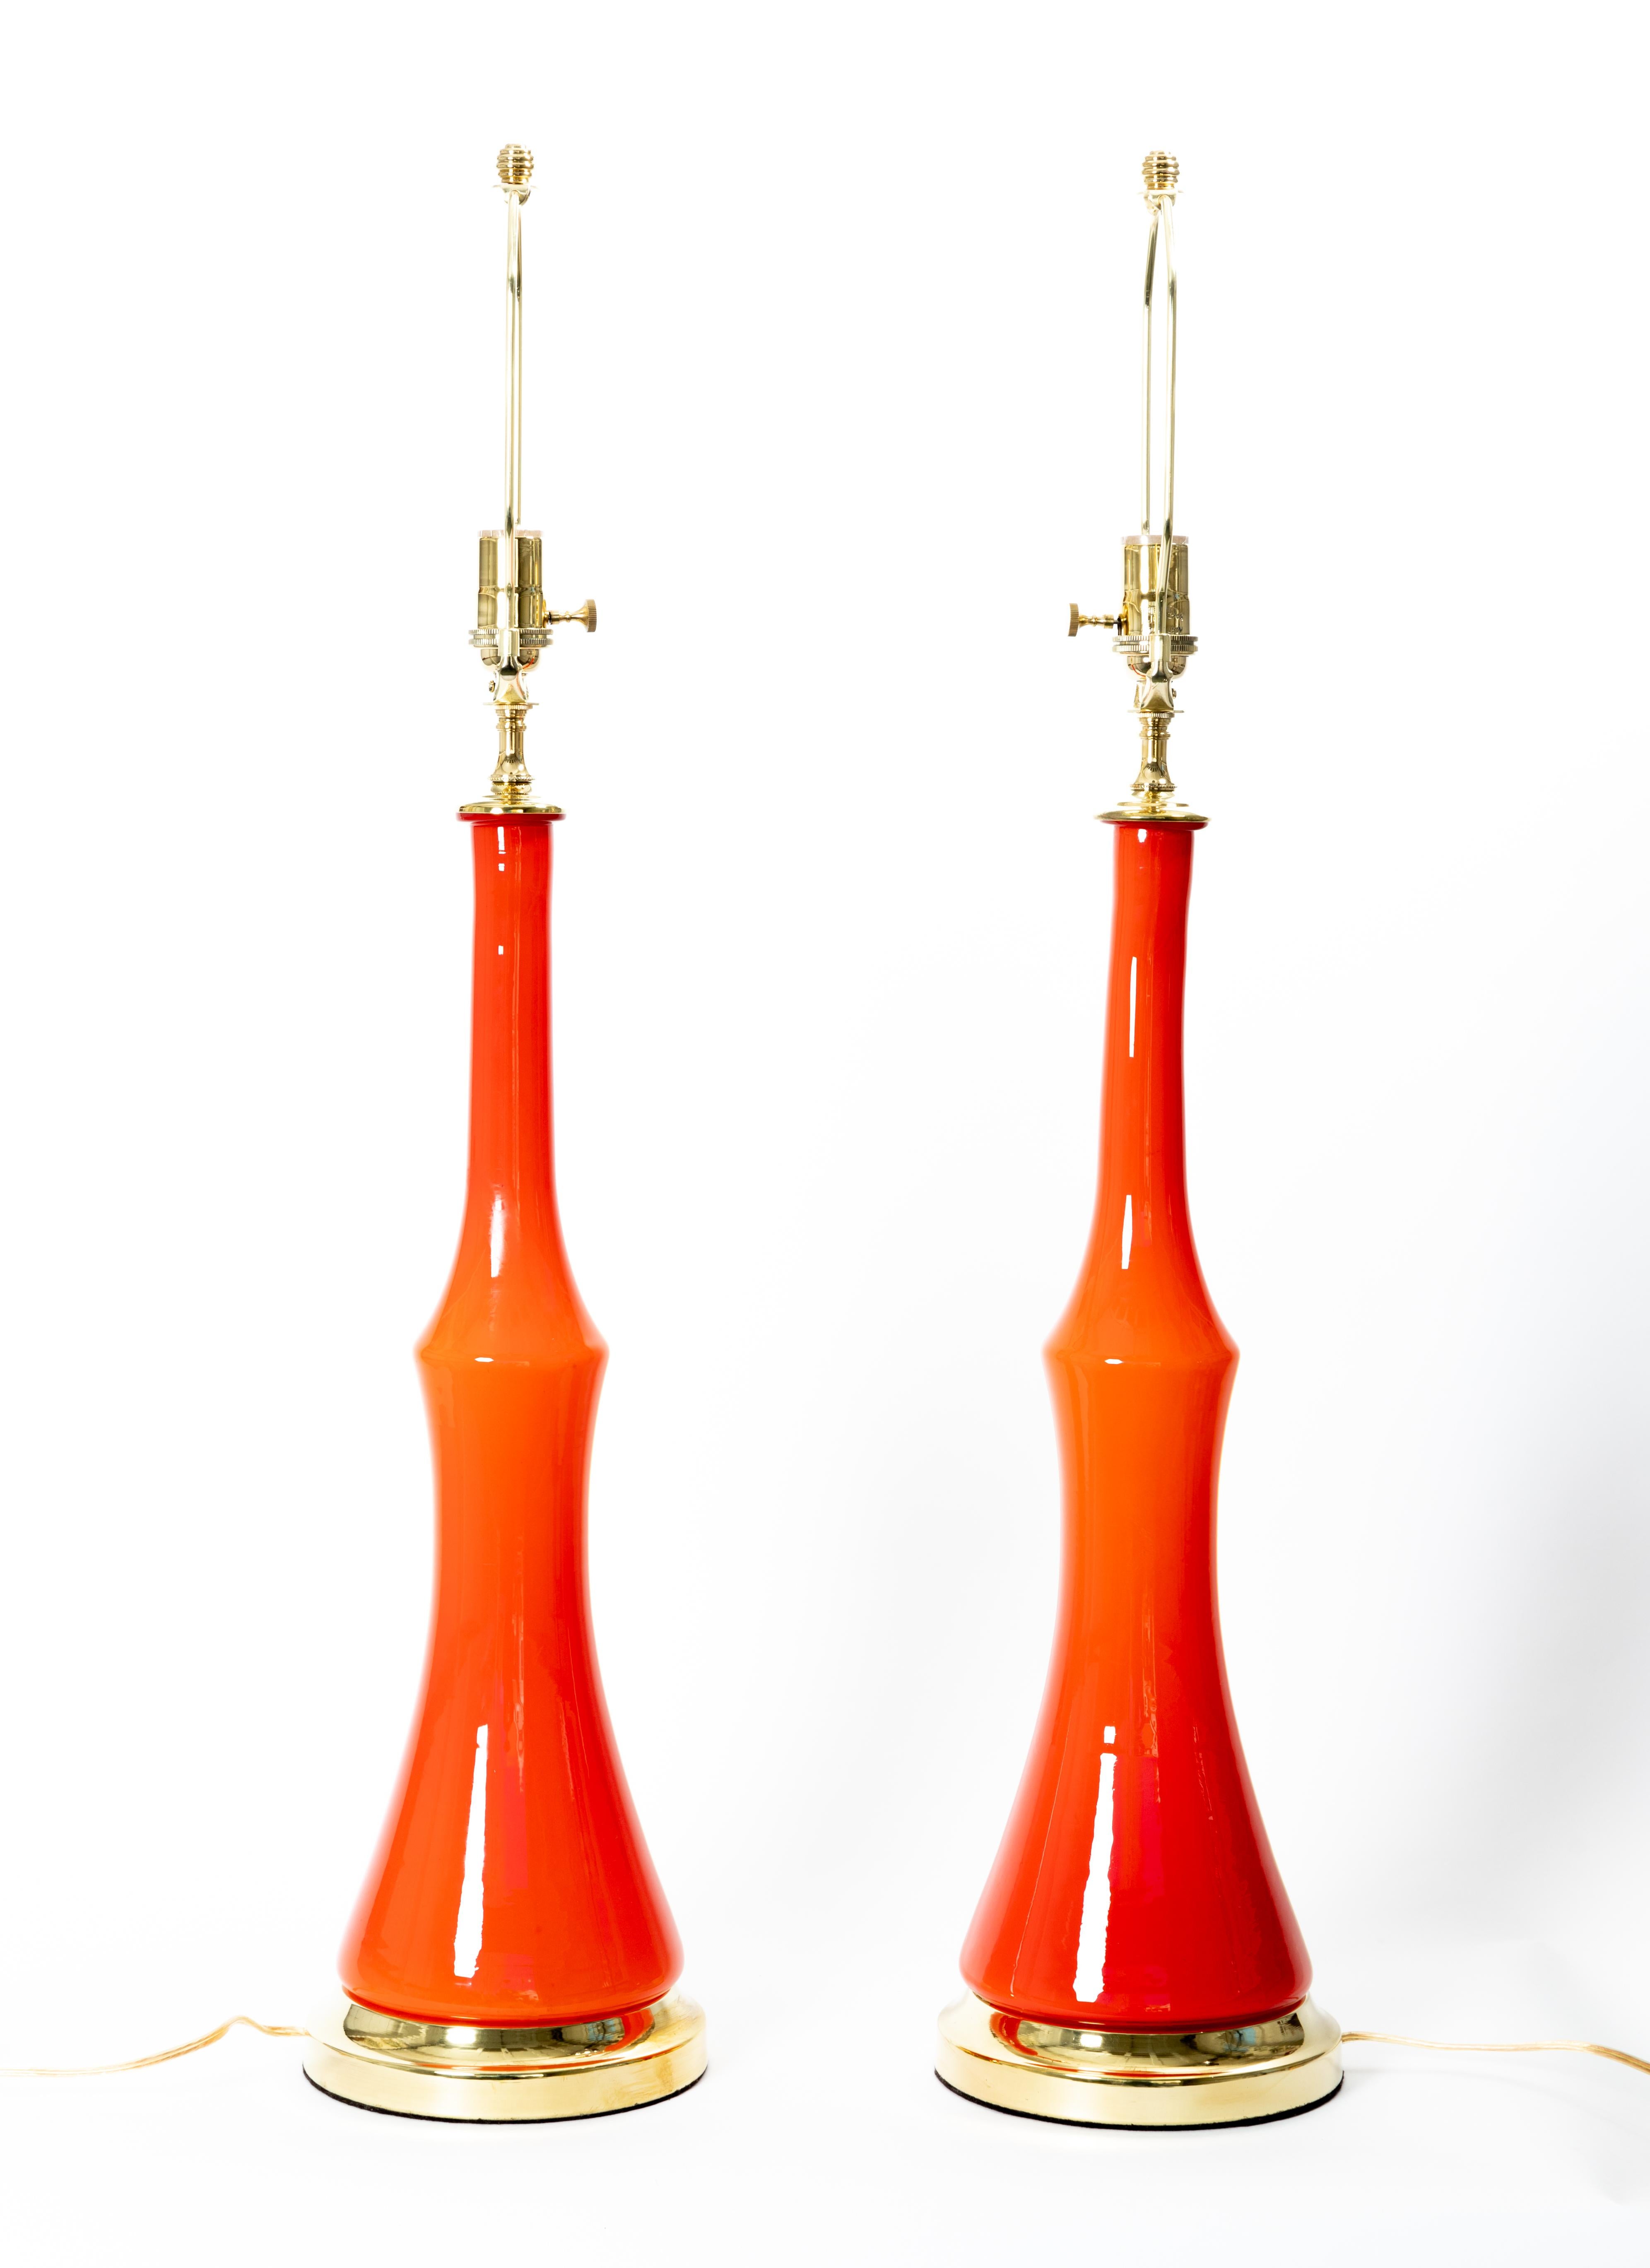 Pair of orange Murano glass table lamps with brass detail.